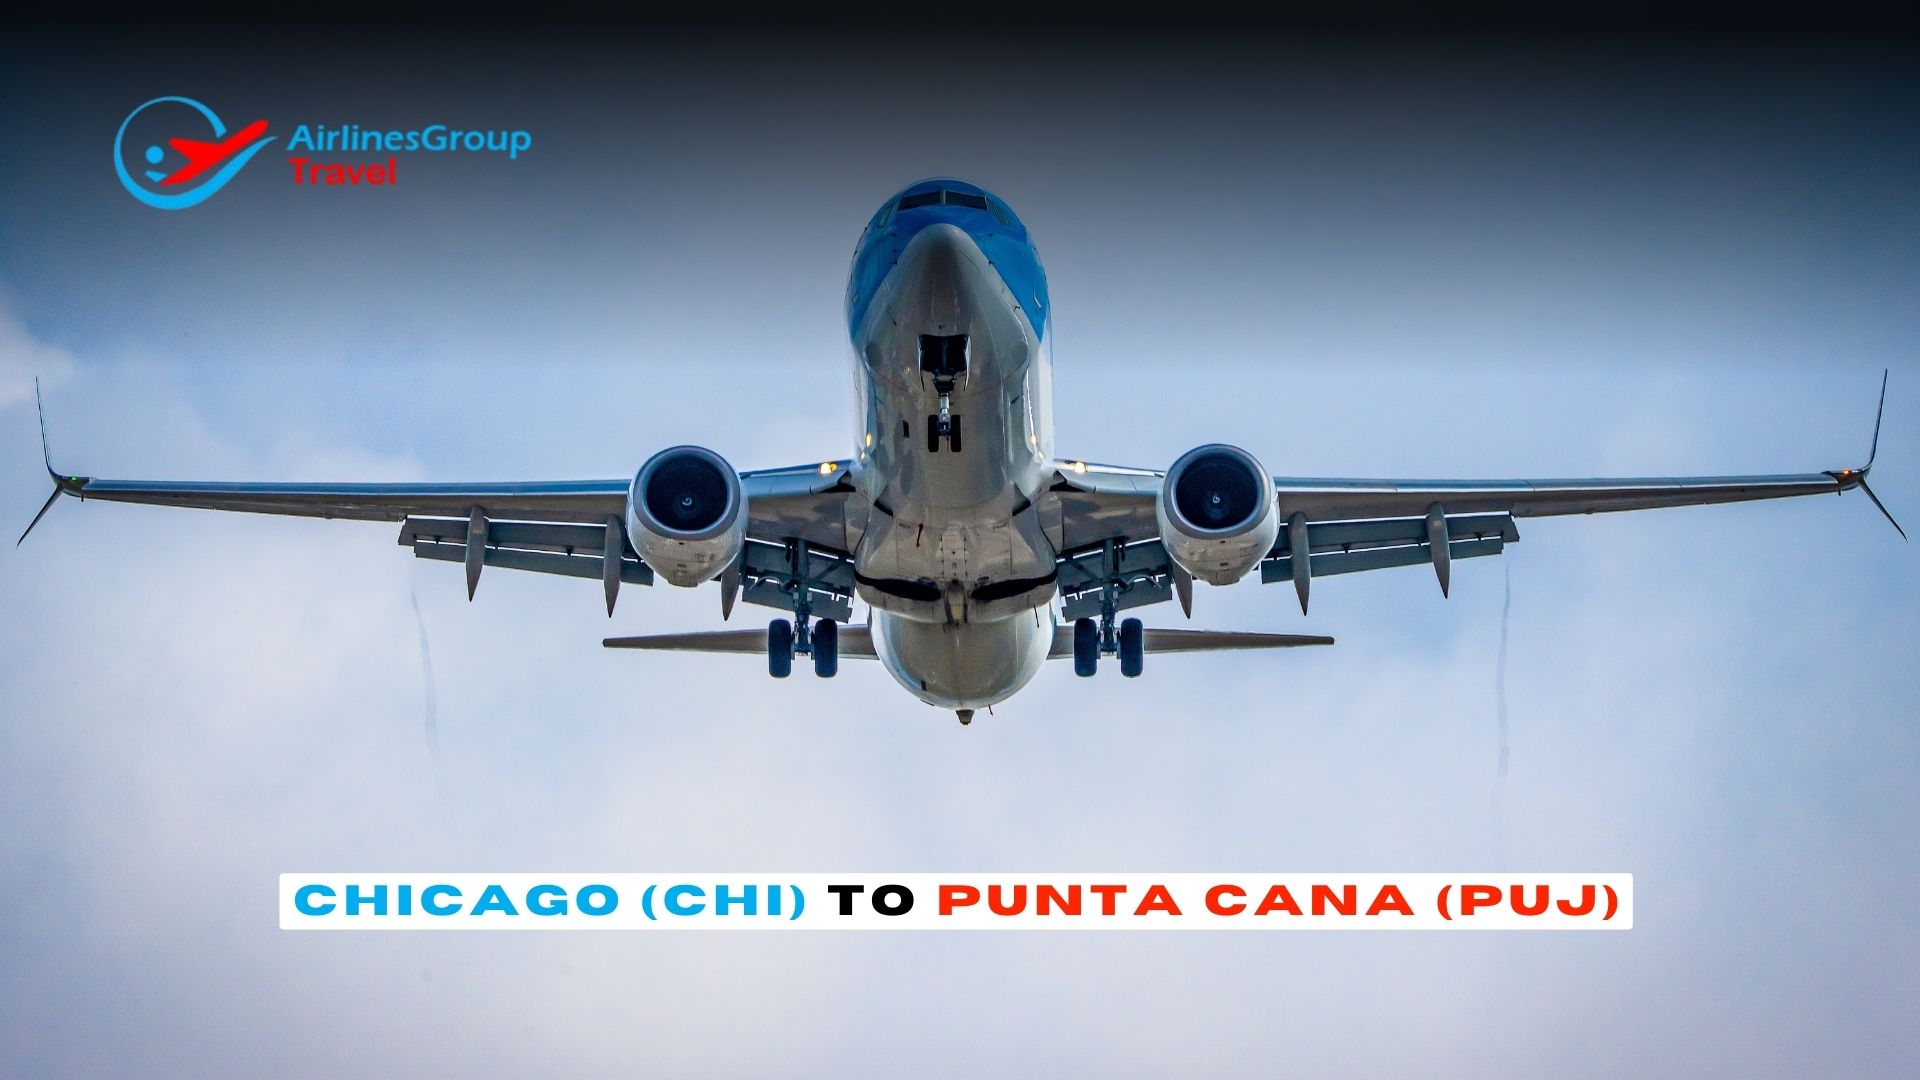 Chicago to Punta Cana